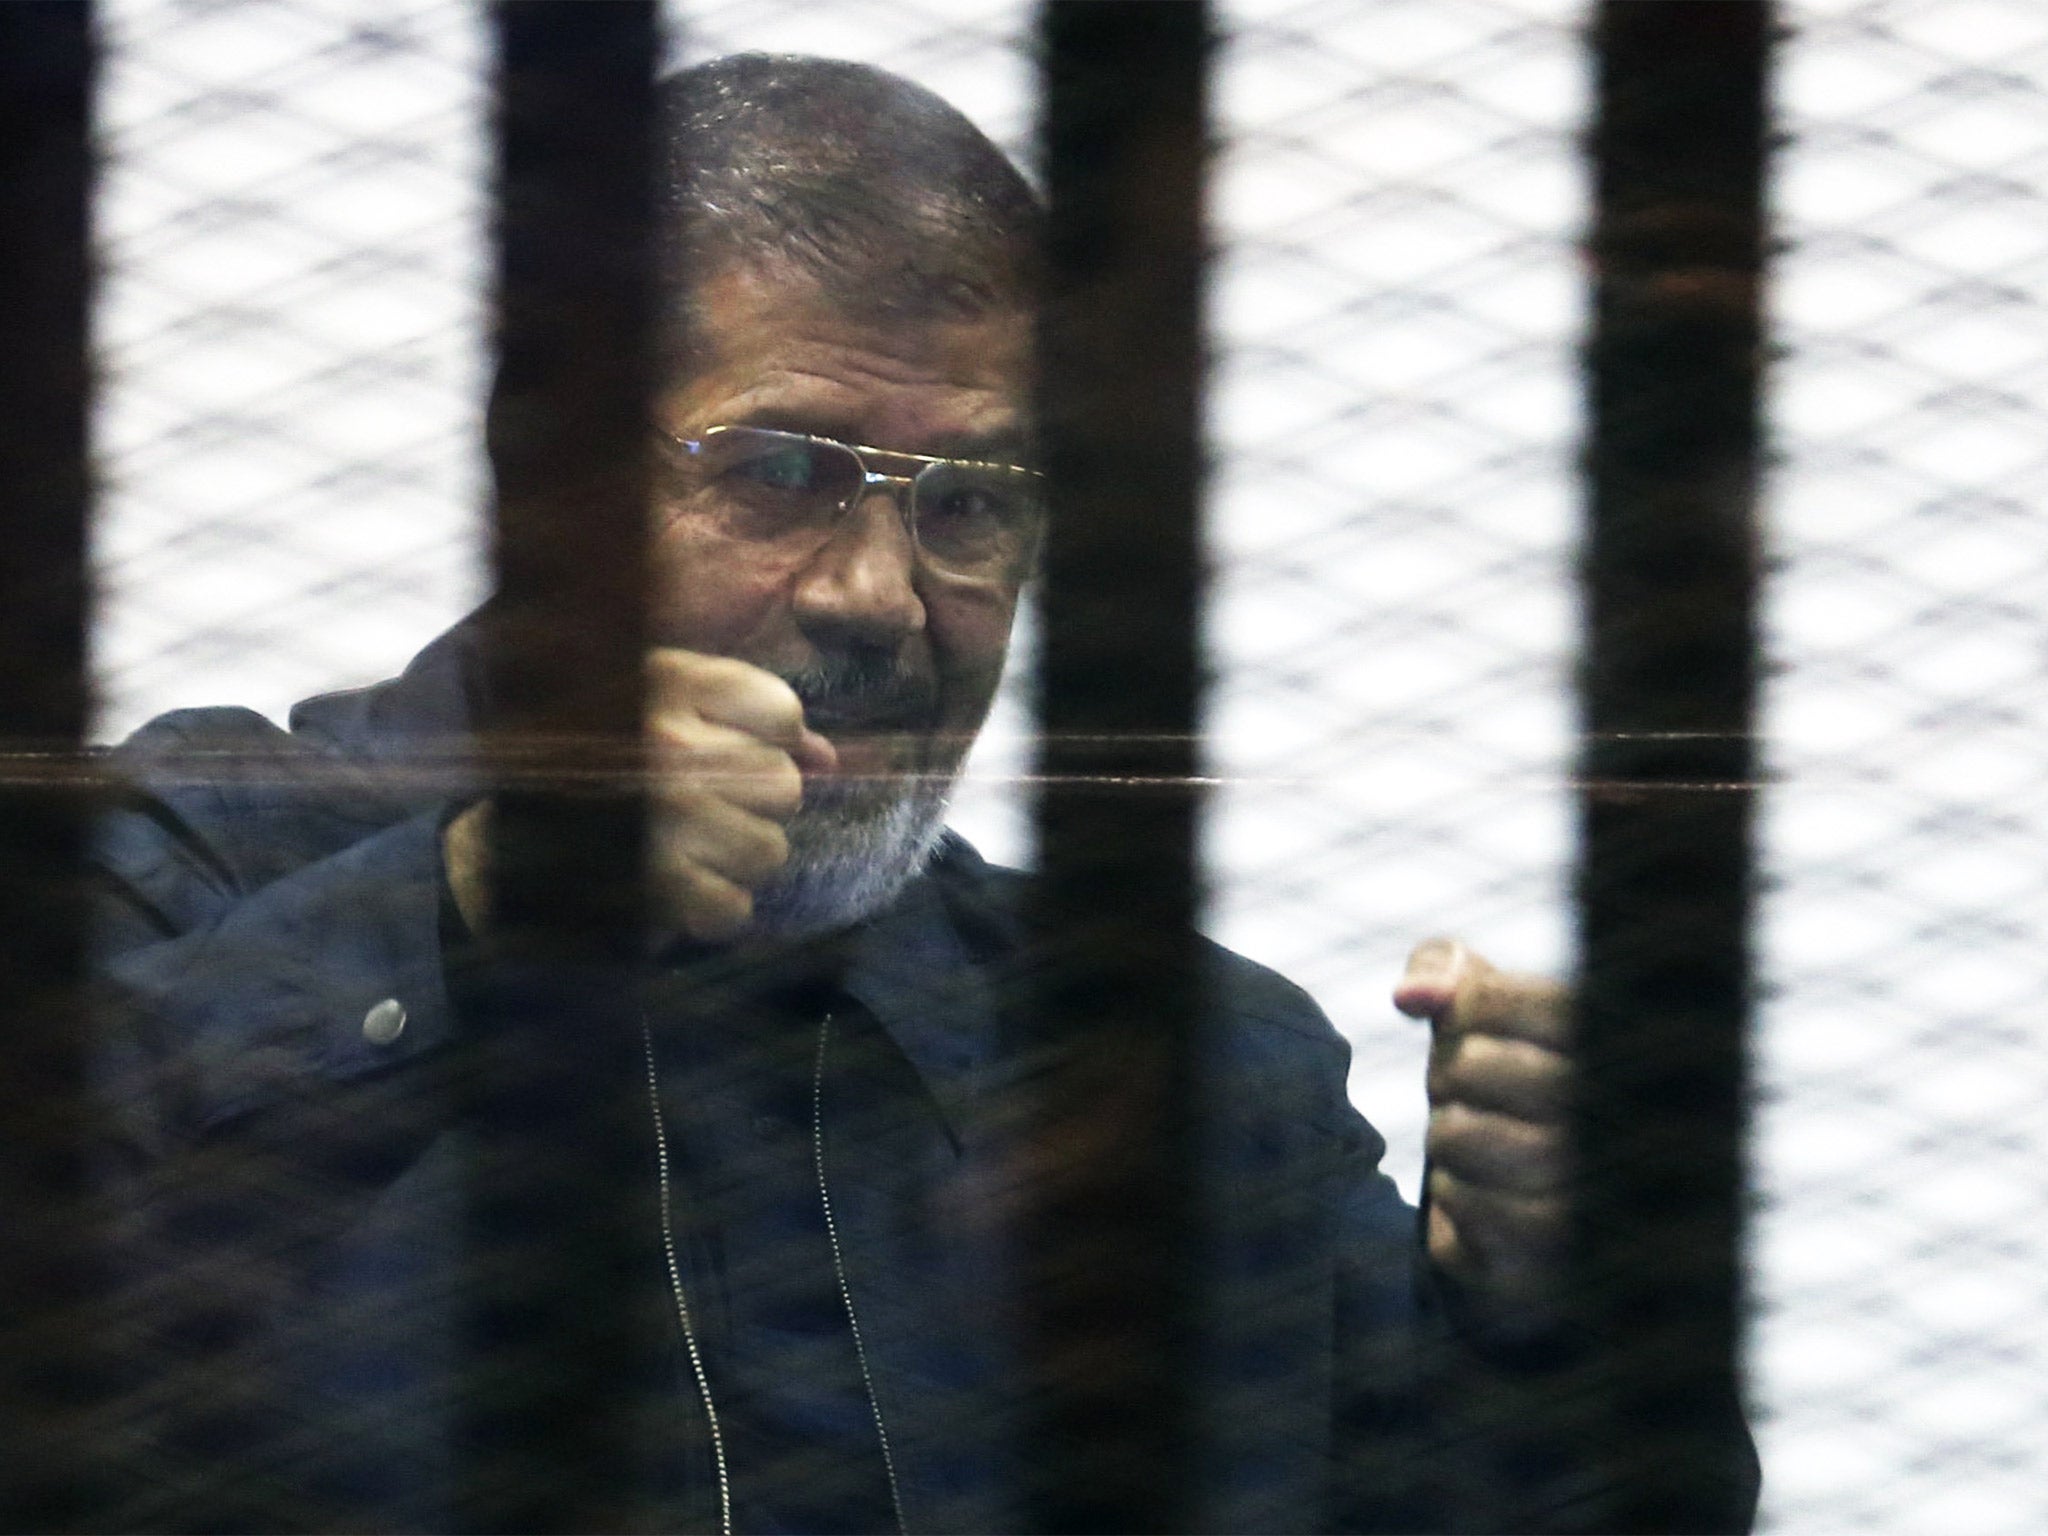 Ousted Egyptian President Mohammed Morsi faces death